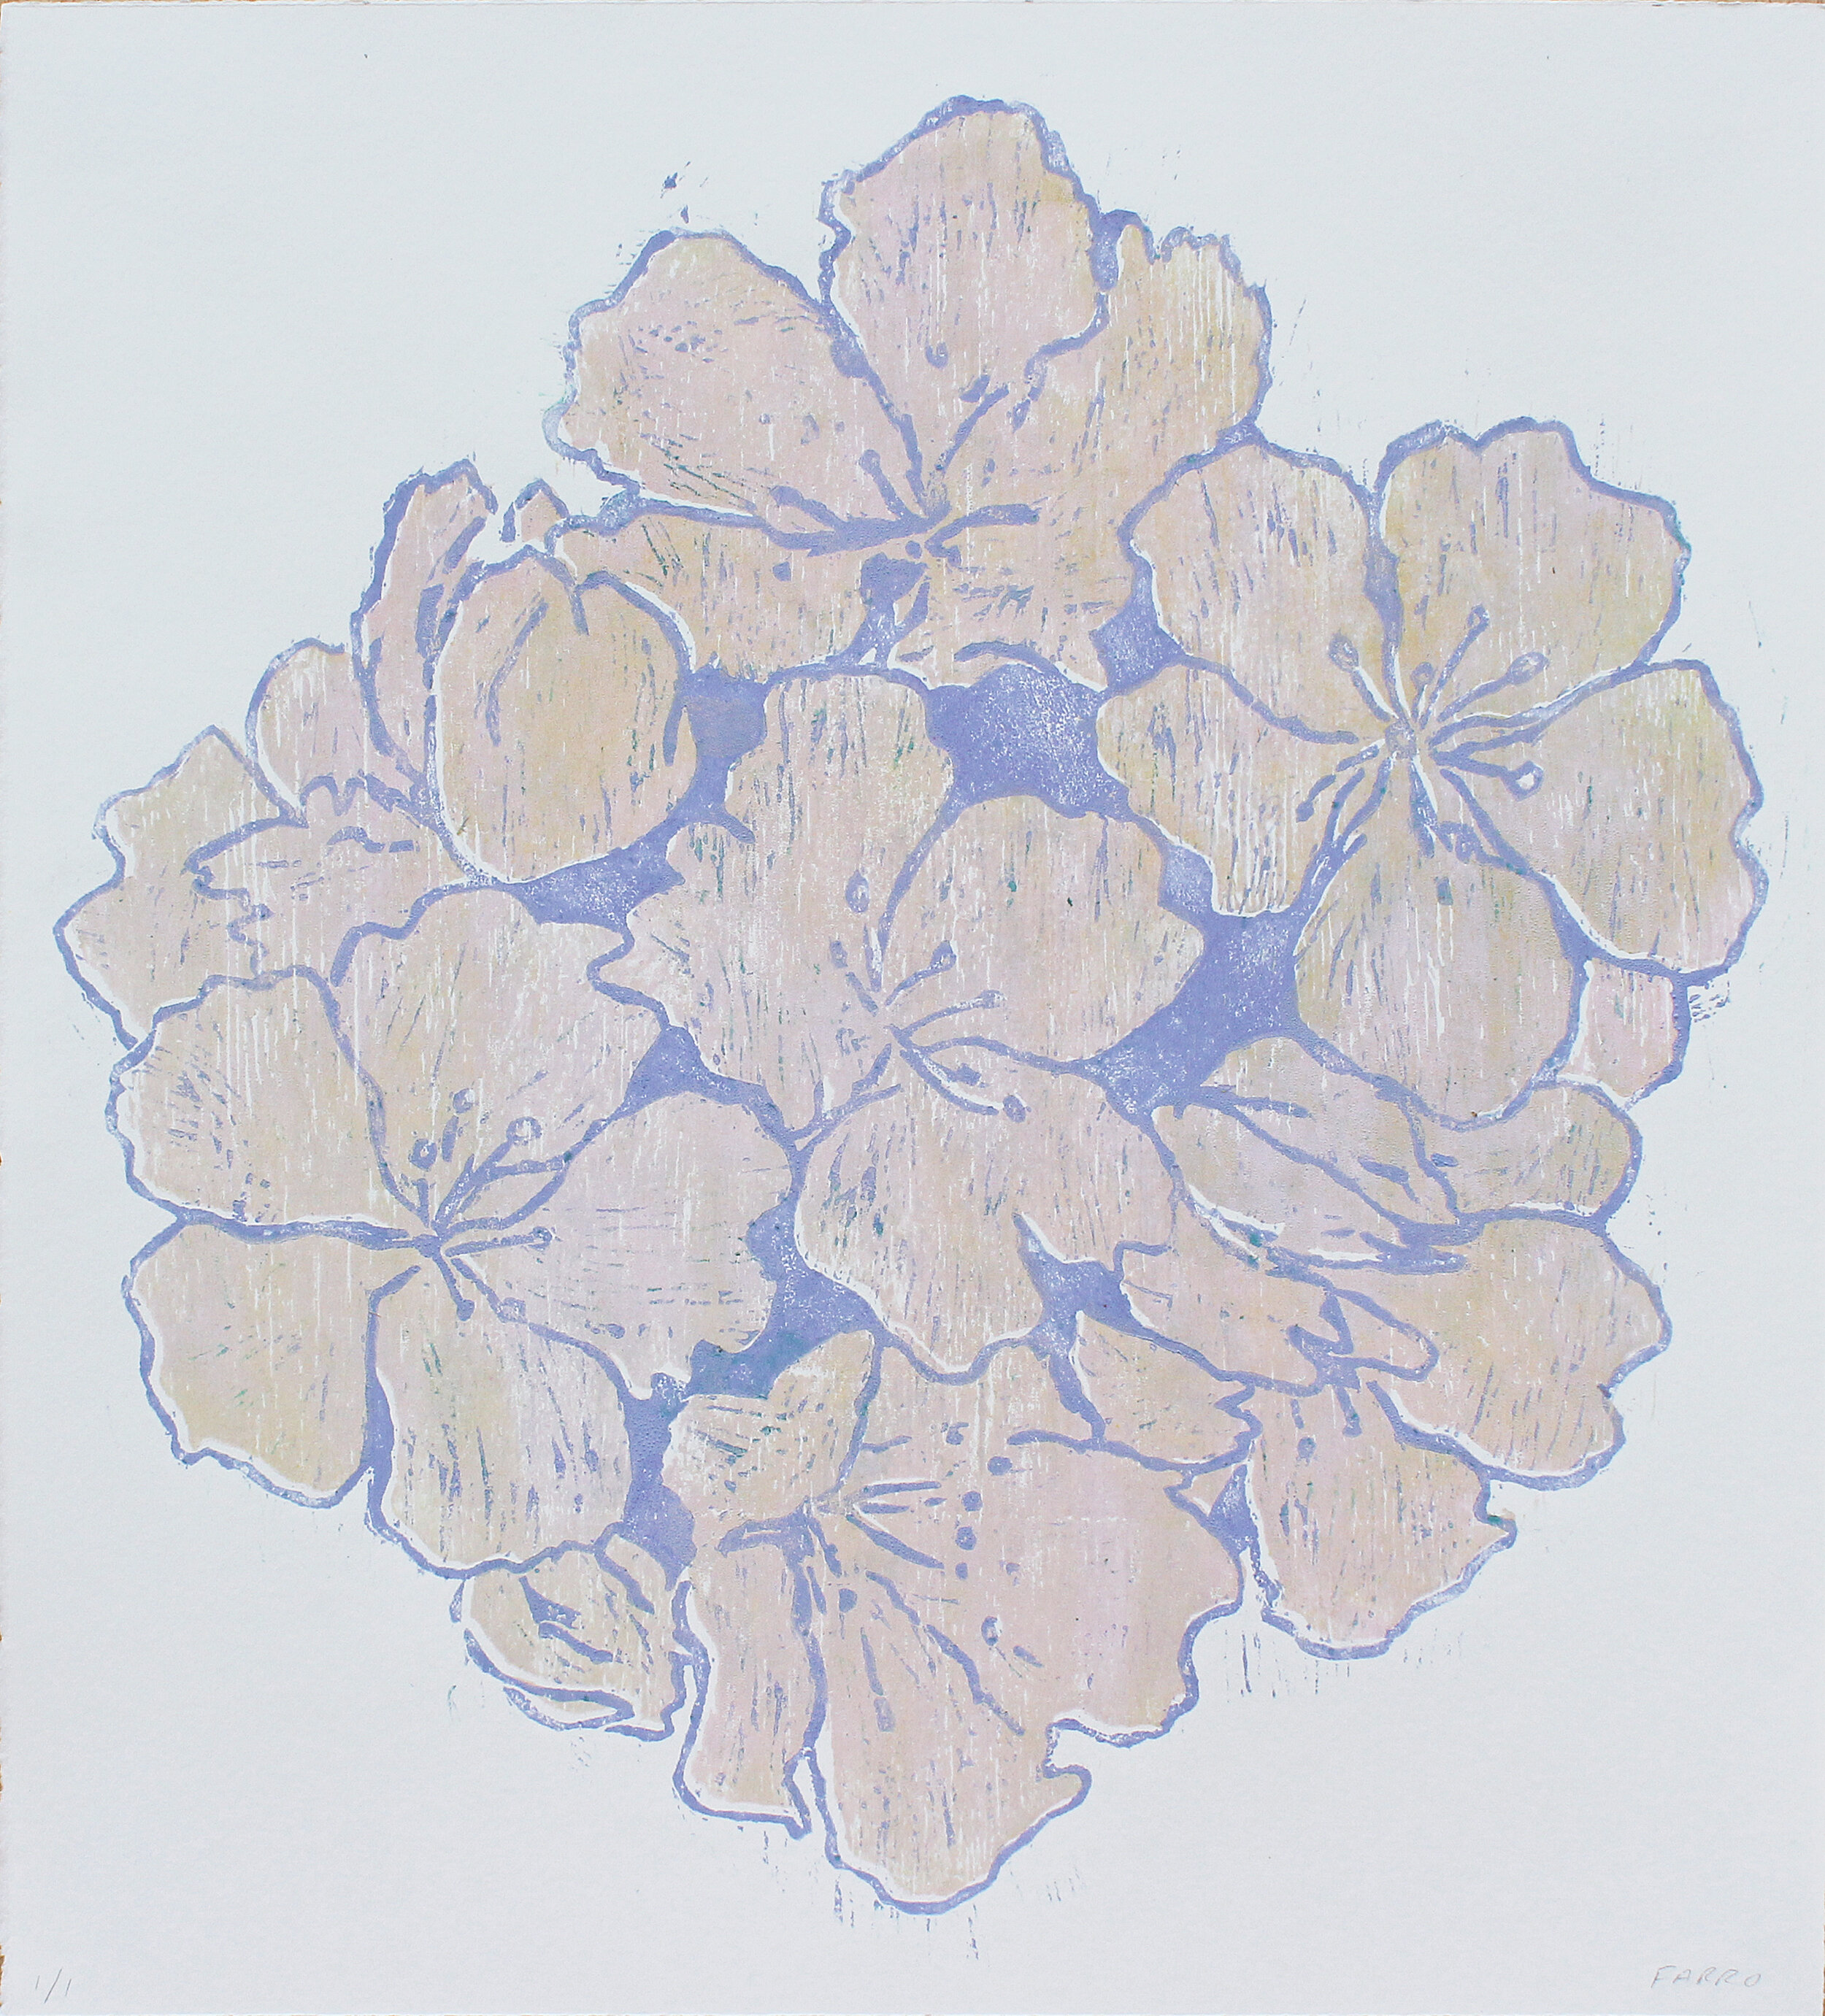   pink carnations  woodblock print edition of 1 16.5 x 17.5” 2019   purchase  